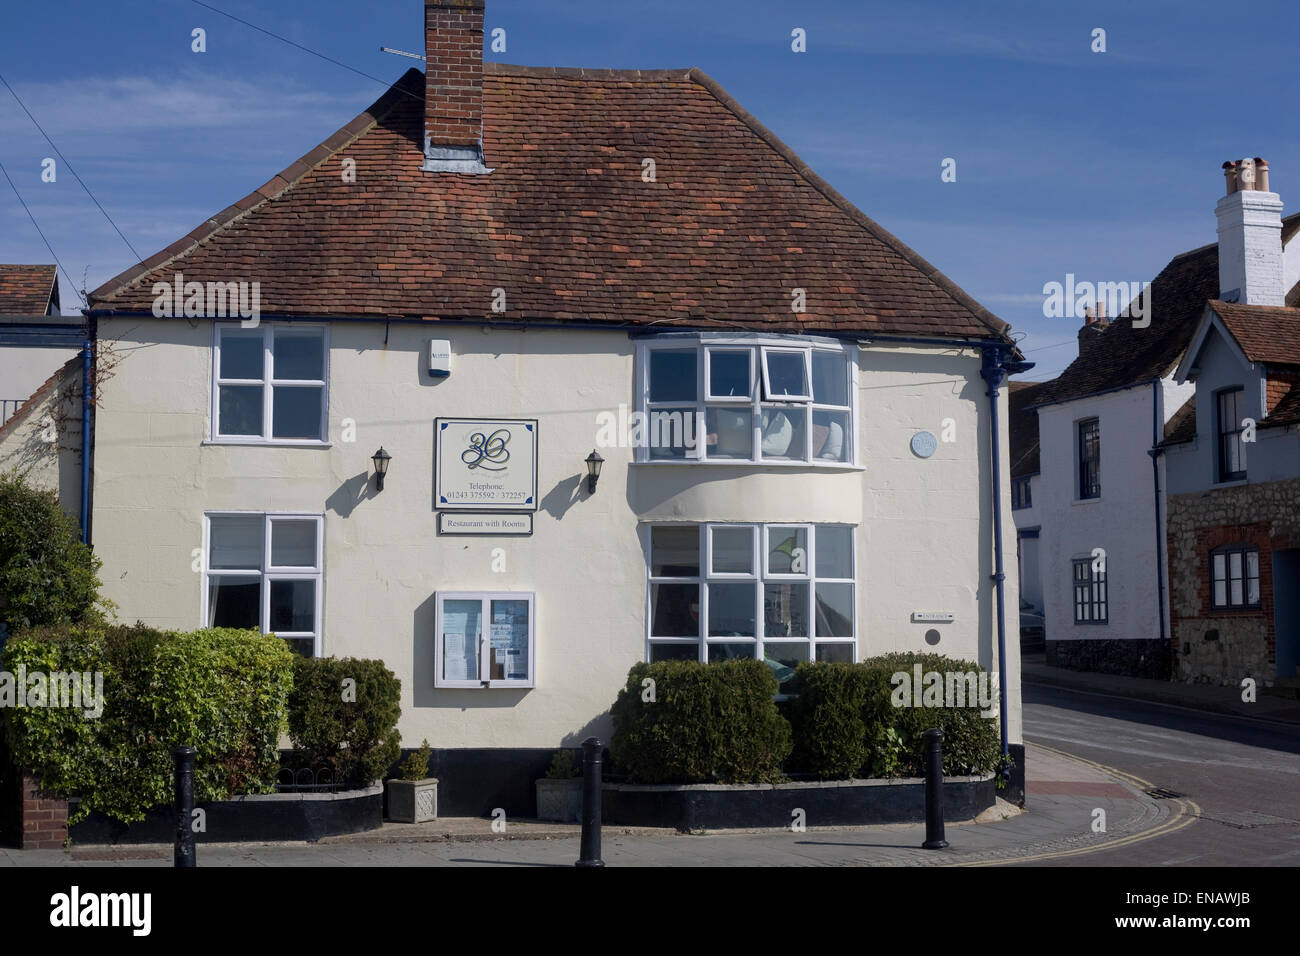 36 on the Quay restaurant at the end of South Street in Emsworth Hampshire Stock Photo